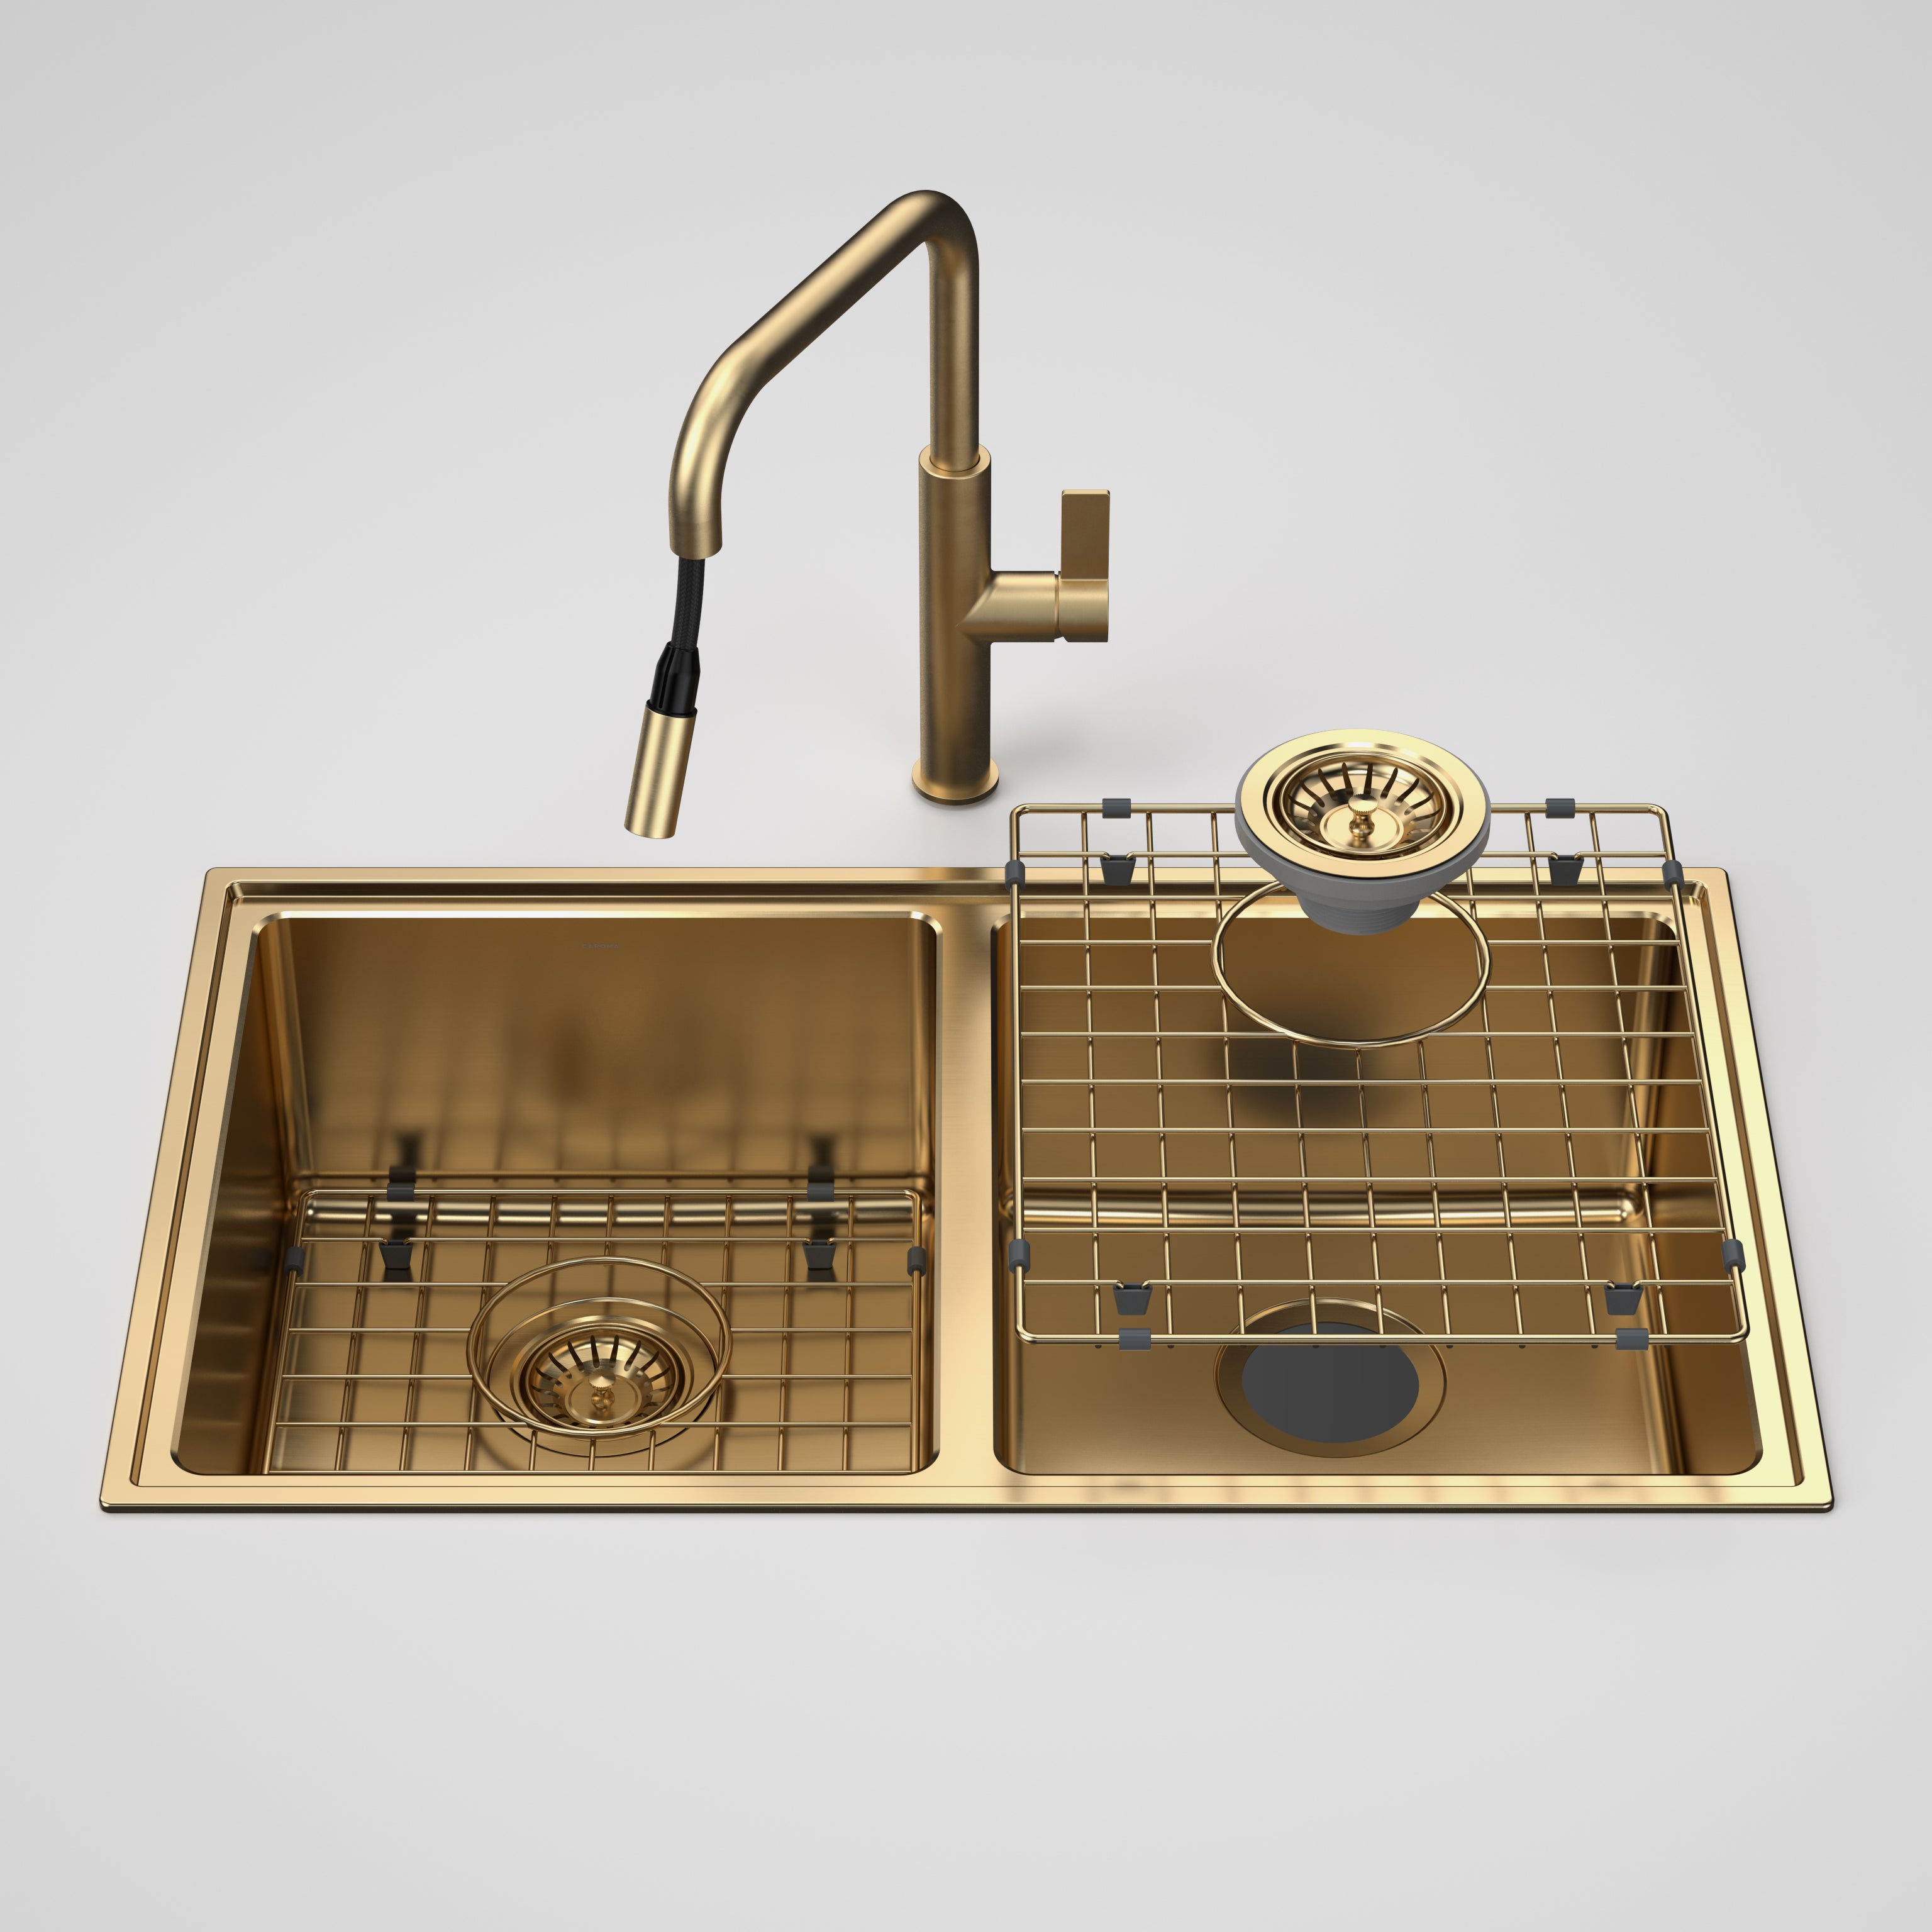 Urbane II Double Bowl Sink with Urbane II - Pul l Out Sink Mixer - Brushed Brass